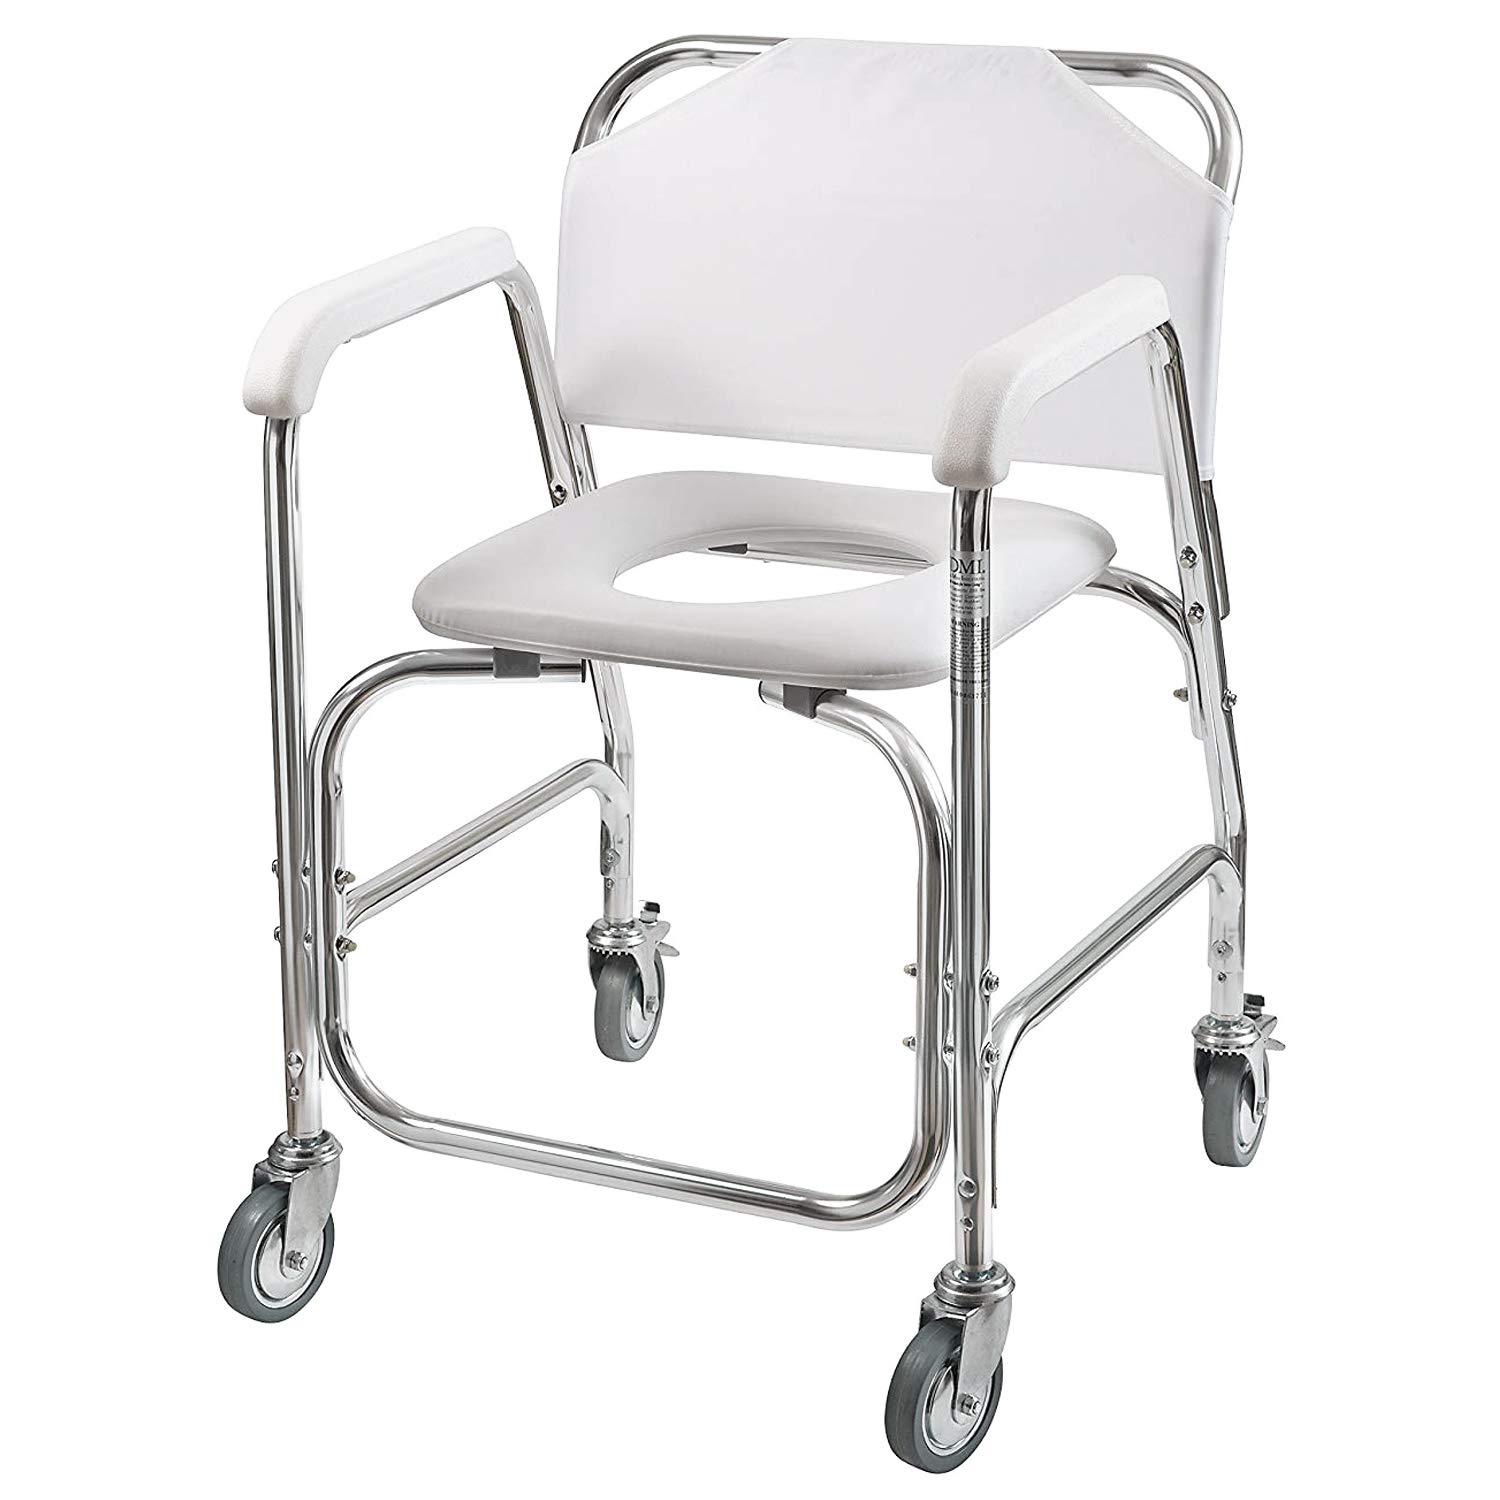 DMI 3-1 Rolling Shower Chair, Rolling Bathroom Wheelchair for Handicapped, Elderly, Injured or Disabled & Transfer Board and Slide Board, FSA Eligible, Made of Heavy-Duty Wood for Patient